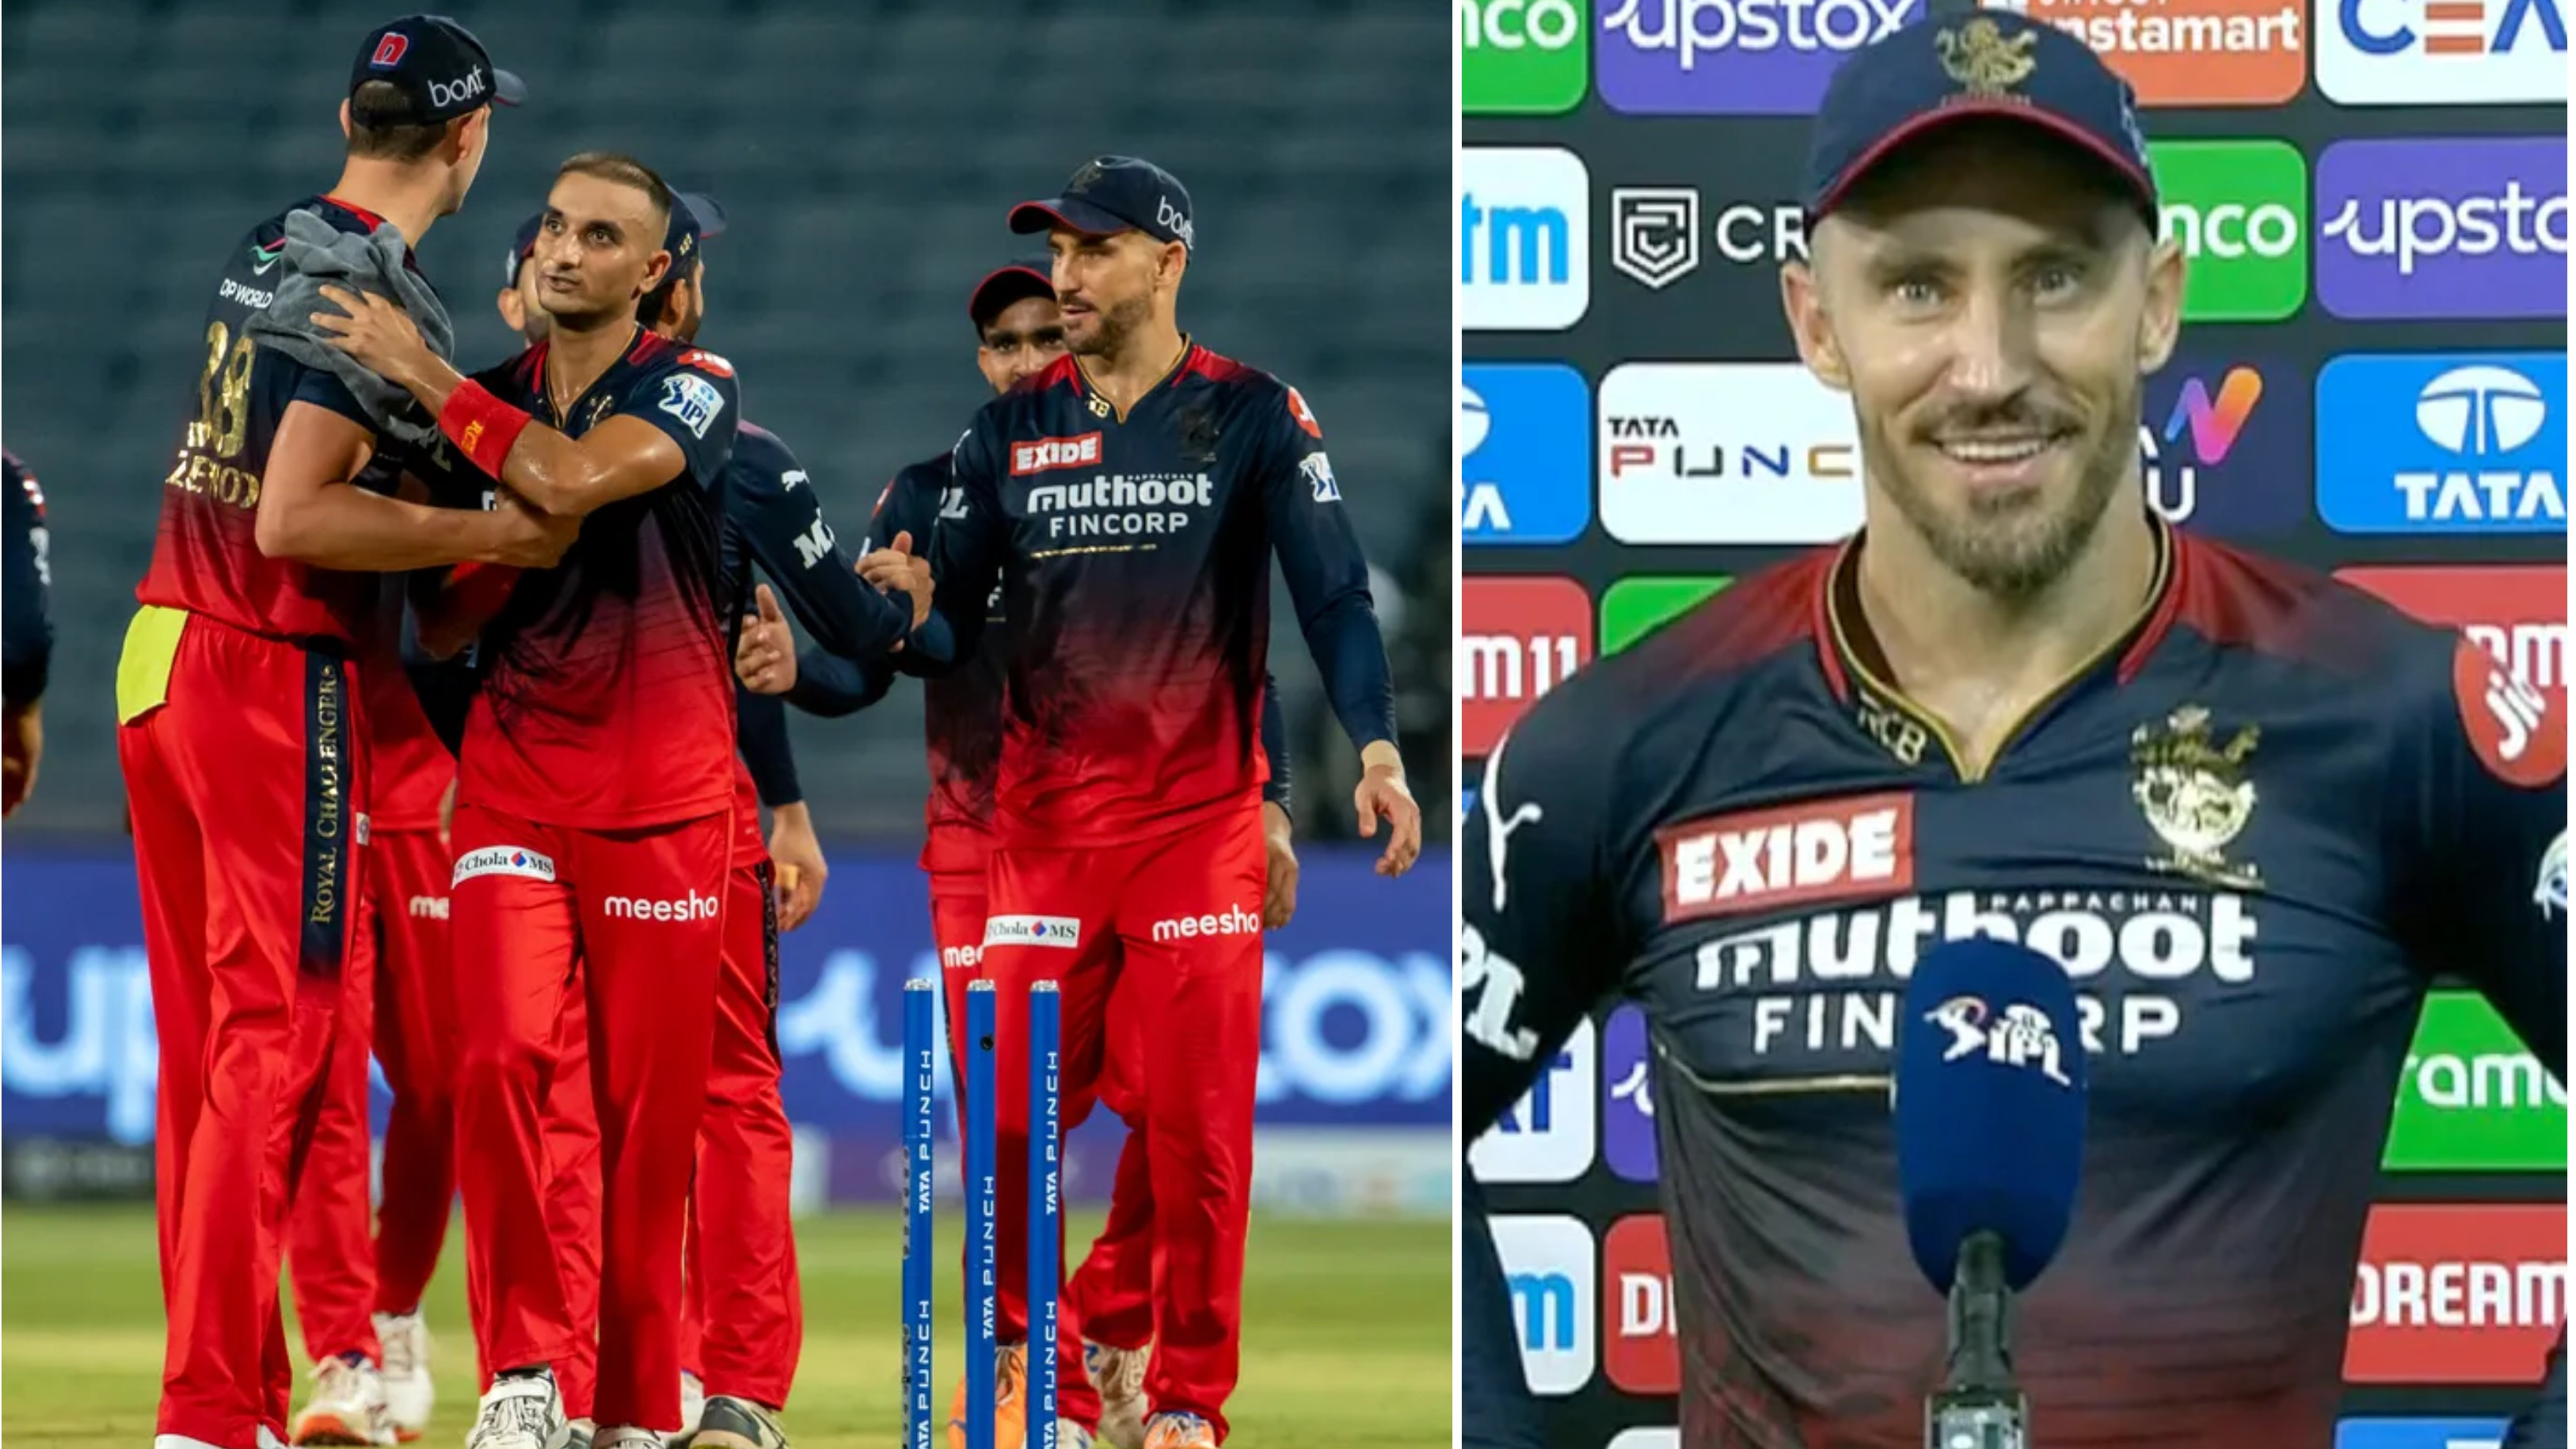 IPL 2022: “We are moving in the right direction”, Faf du Plessis after RCB’s win over CSK